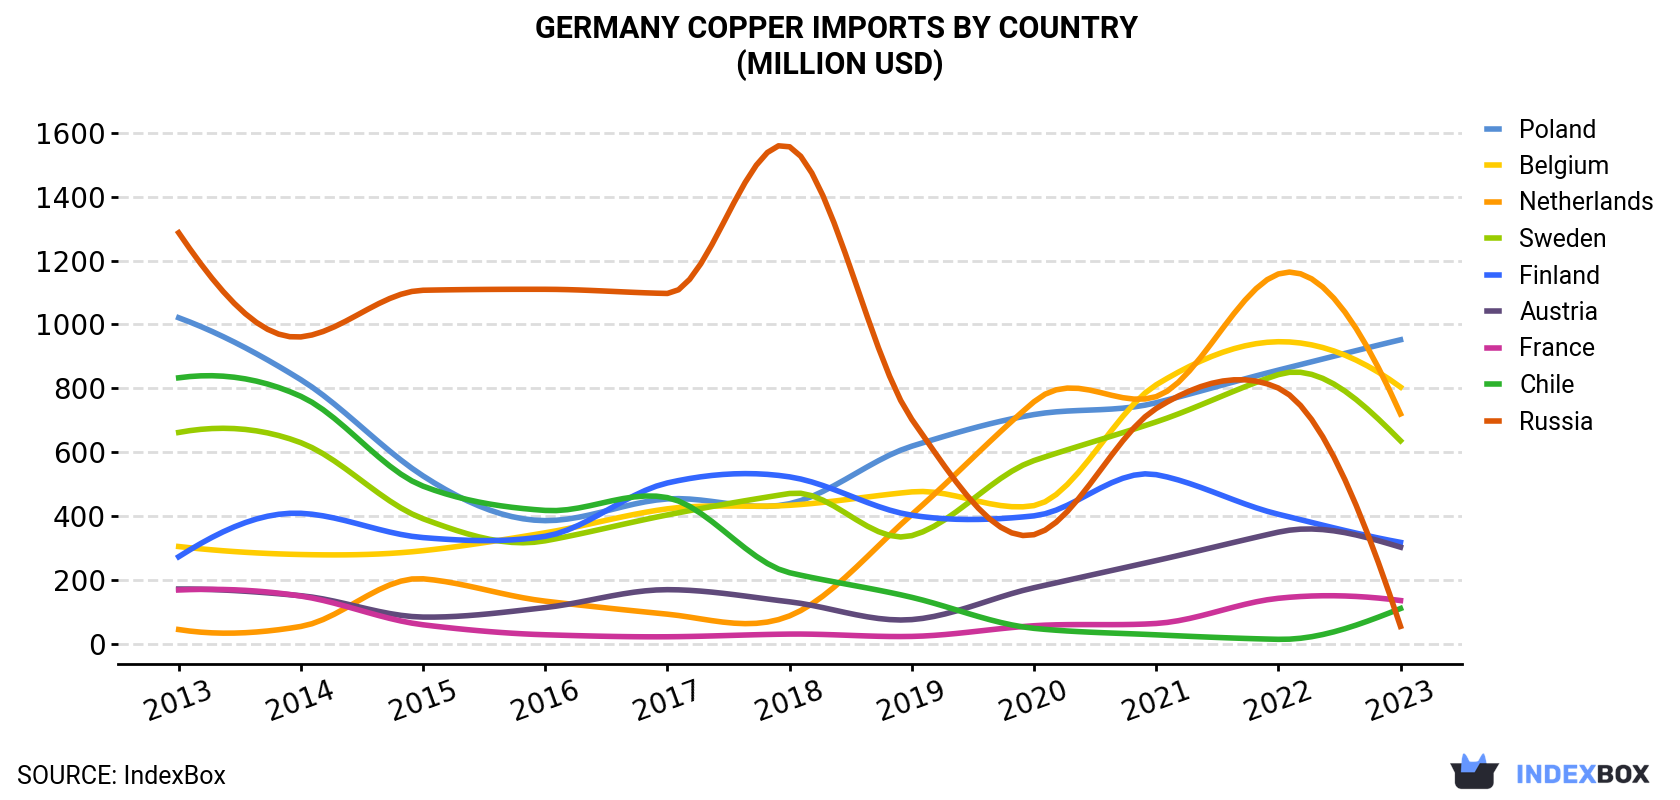 Germany Copper Imports By Country (Million USD)